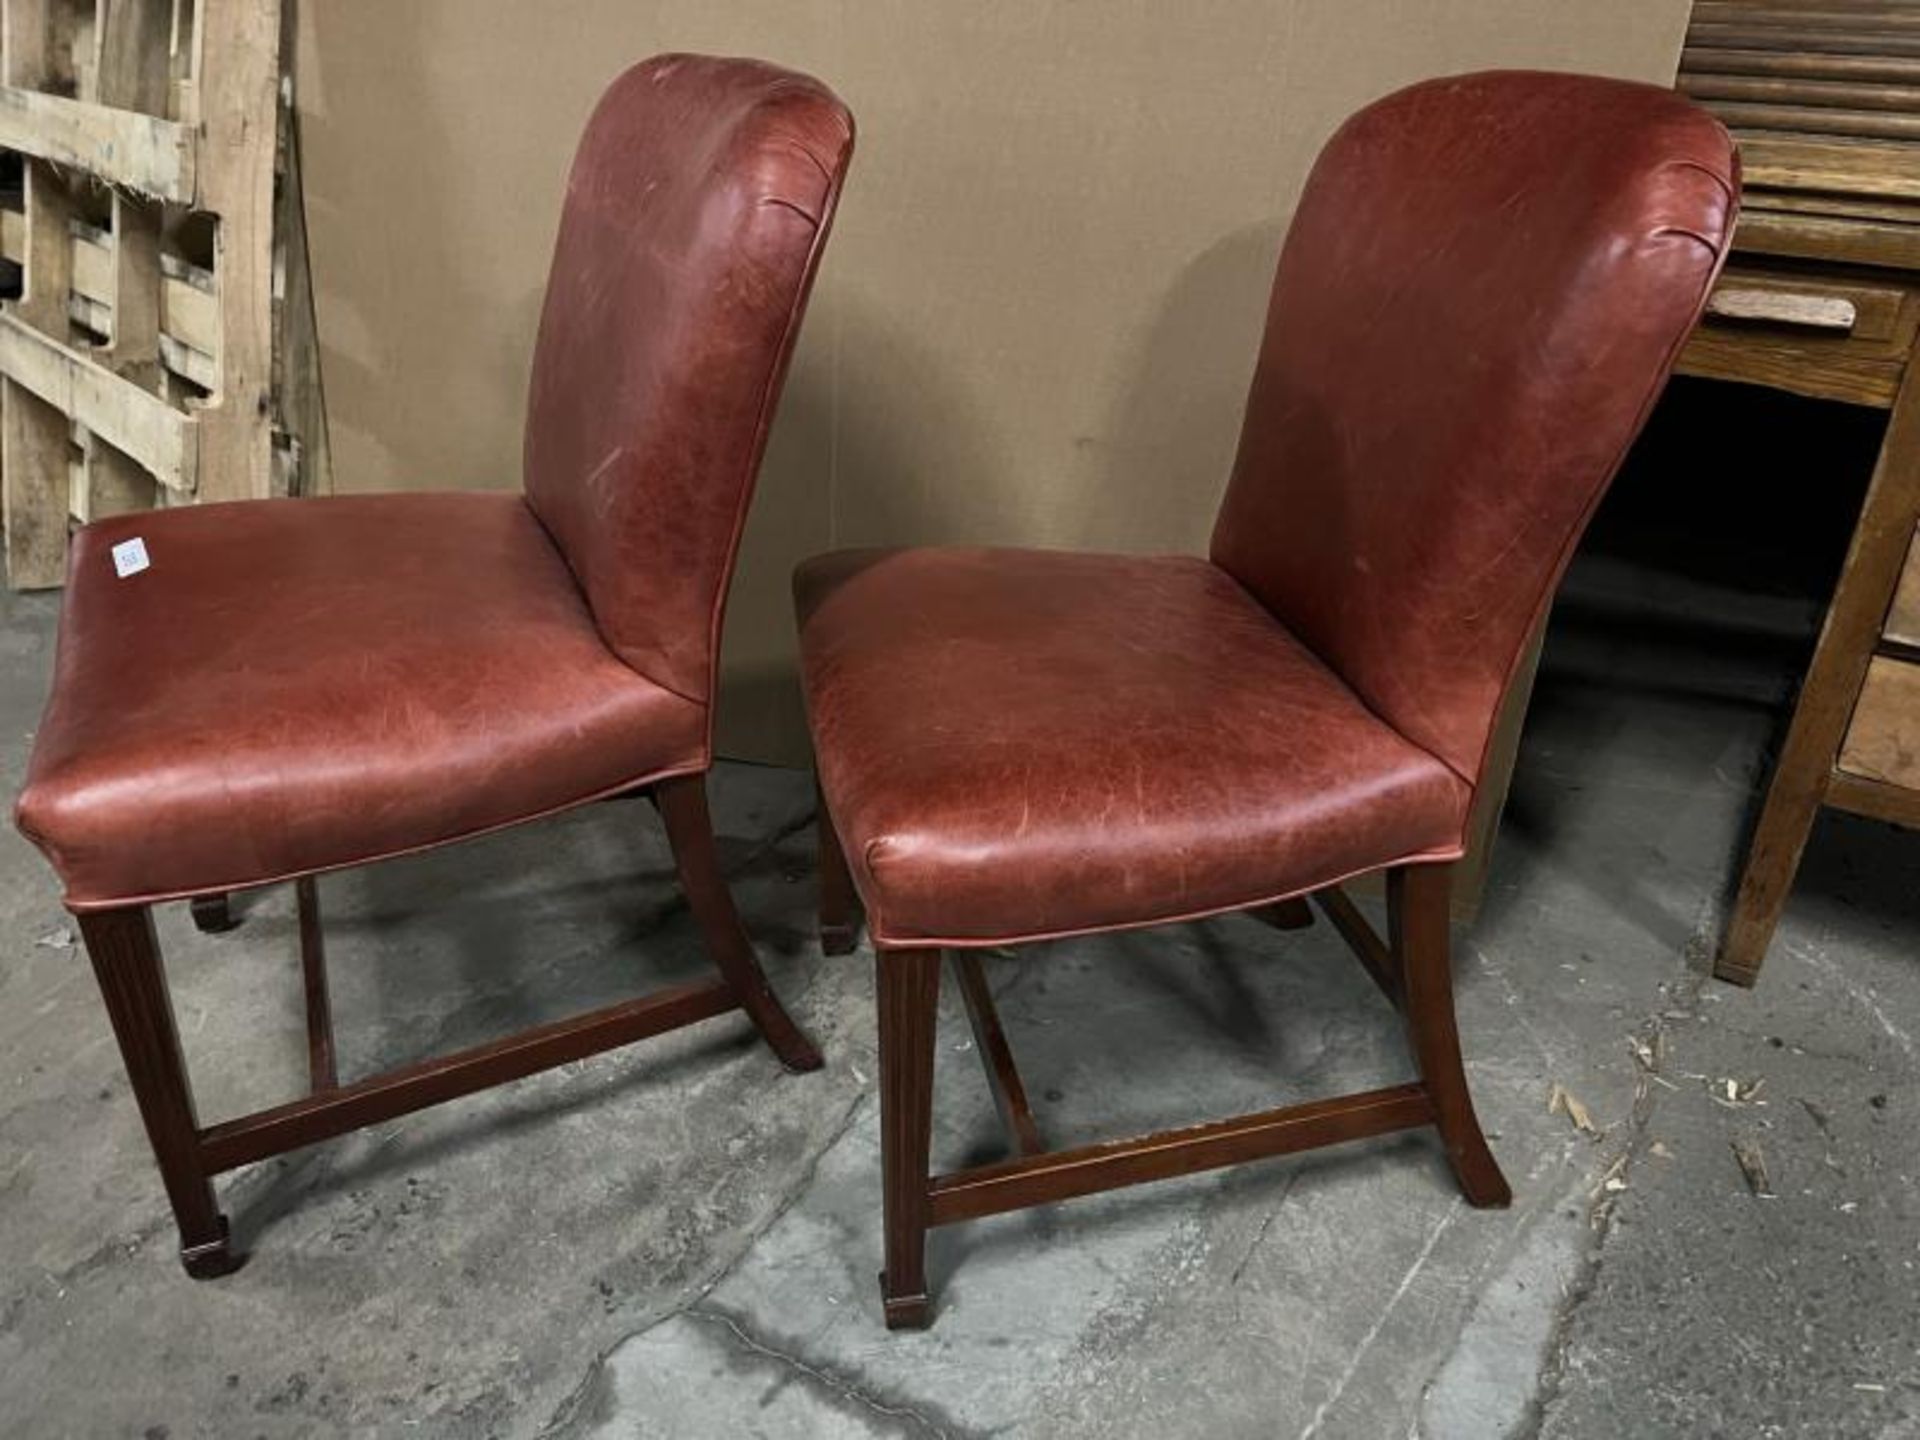 Pair of Red Vinyl Chairs; Located in Mill Building - Image 9 of 20